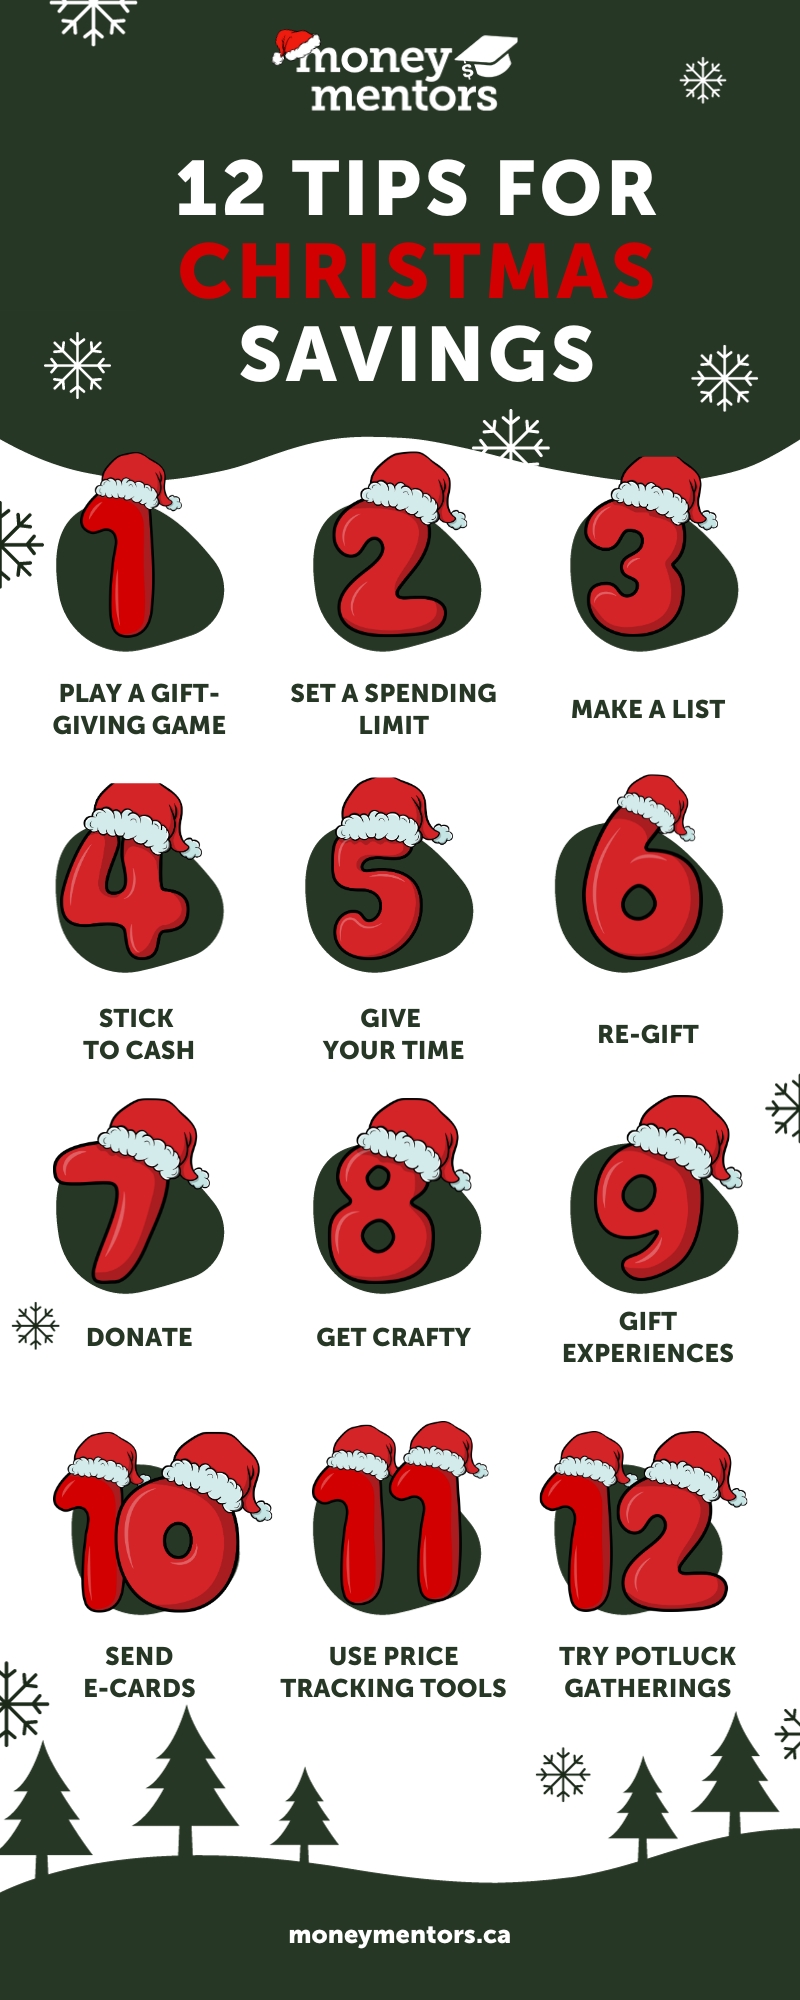 This is an infographic titled "12 Tips for Christmas Savings". It has a festive theme with snowflakes and Christmas trees in the background, and each tip is presented on a dark green oval with a large red number wearing a Santa hat. The tips are as follows: 1. Play a gift-giving game, 2. Set a spending limit, 3. Make a list, 4. Stick to cash, 5. Give your time, 6. Re-gift, 7. Donate, 8. Get crafty, 9. Gift experiences, 10. Send e-cards, 11. Use price tracking tools, and 12. Try potluck gatherings. At the bottom, there's a URL: moneymenotrs.ca, suggesting this is a resource provided by Money Mentors. The purpose of the infographic is to provide viewers with creative ideas to save money during the Christmas season.